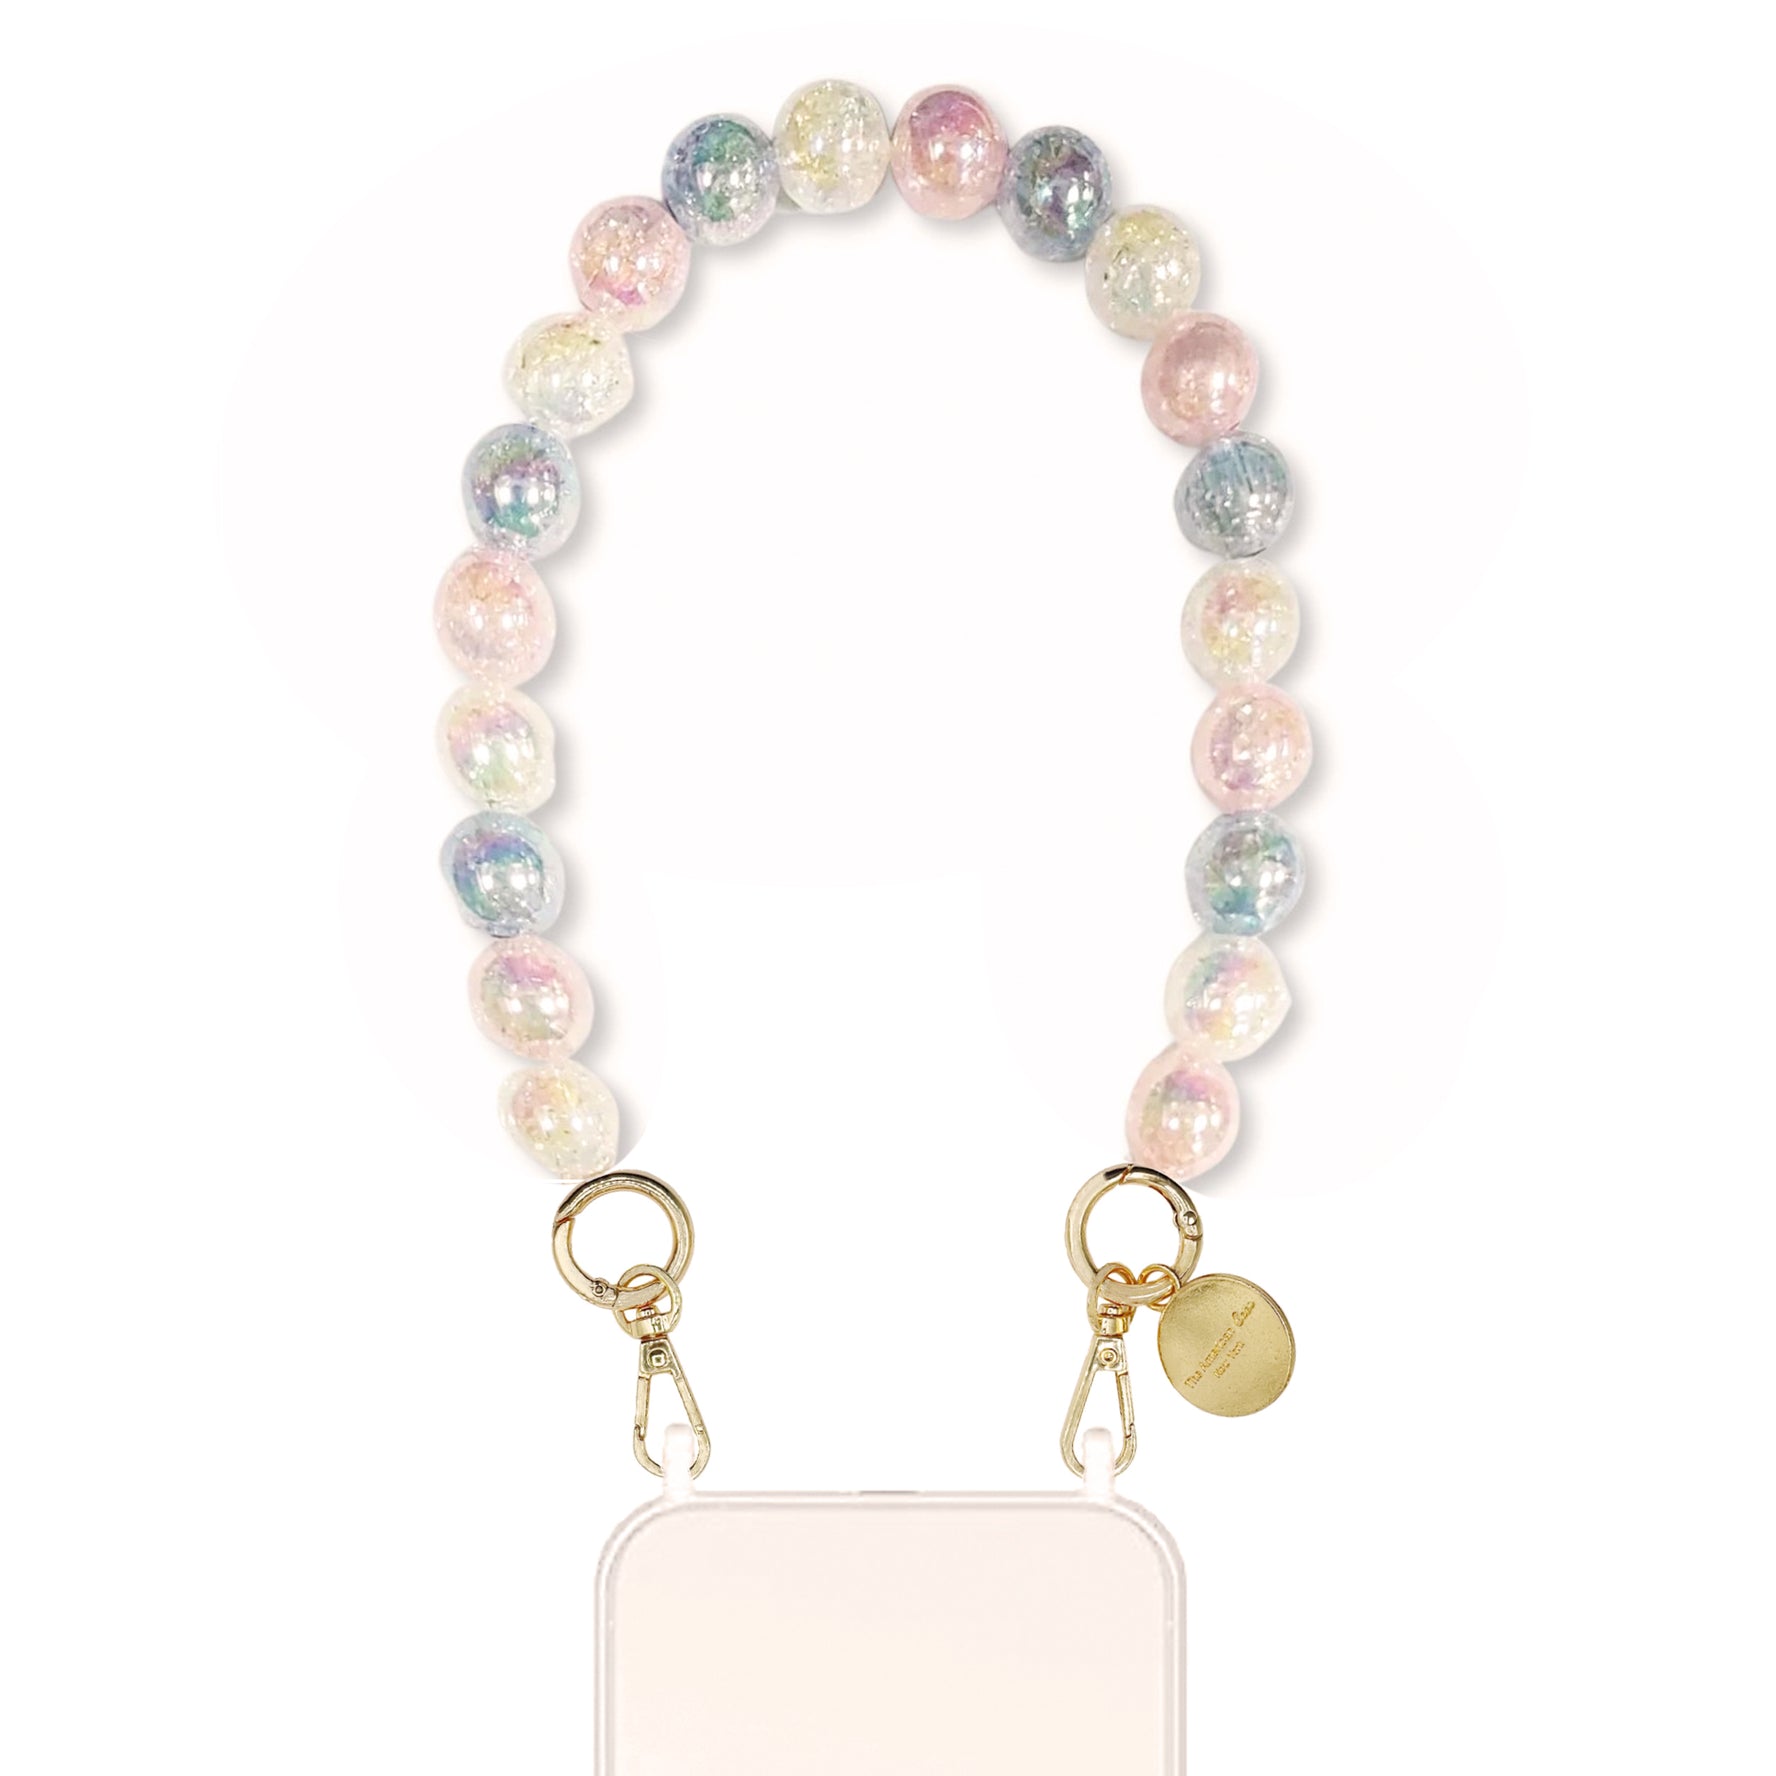 Mia - Pastel Crackle Bead Short Phone Chain with Golden Carabiners